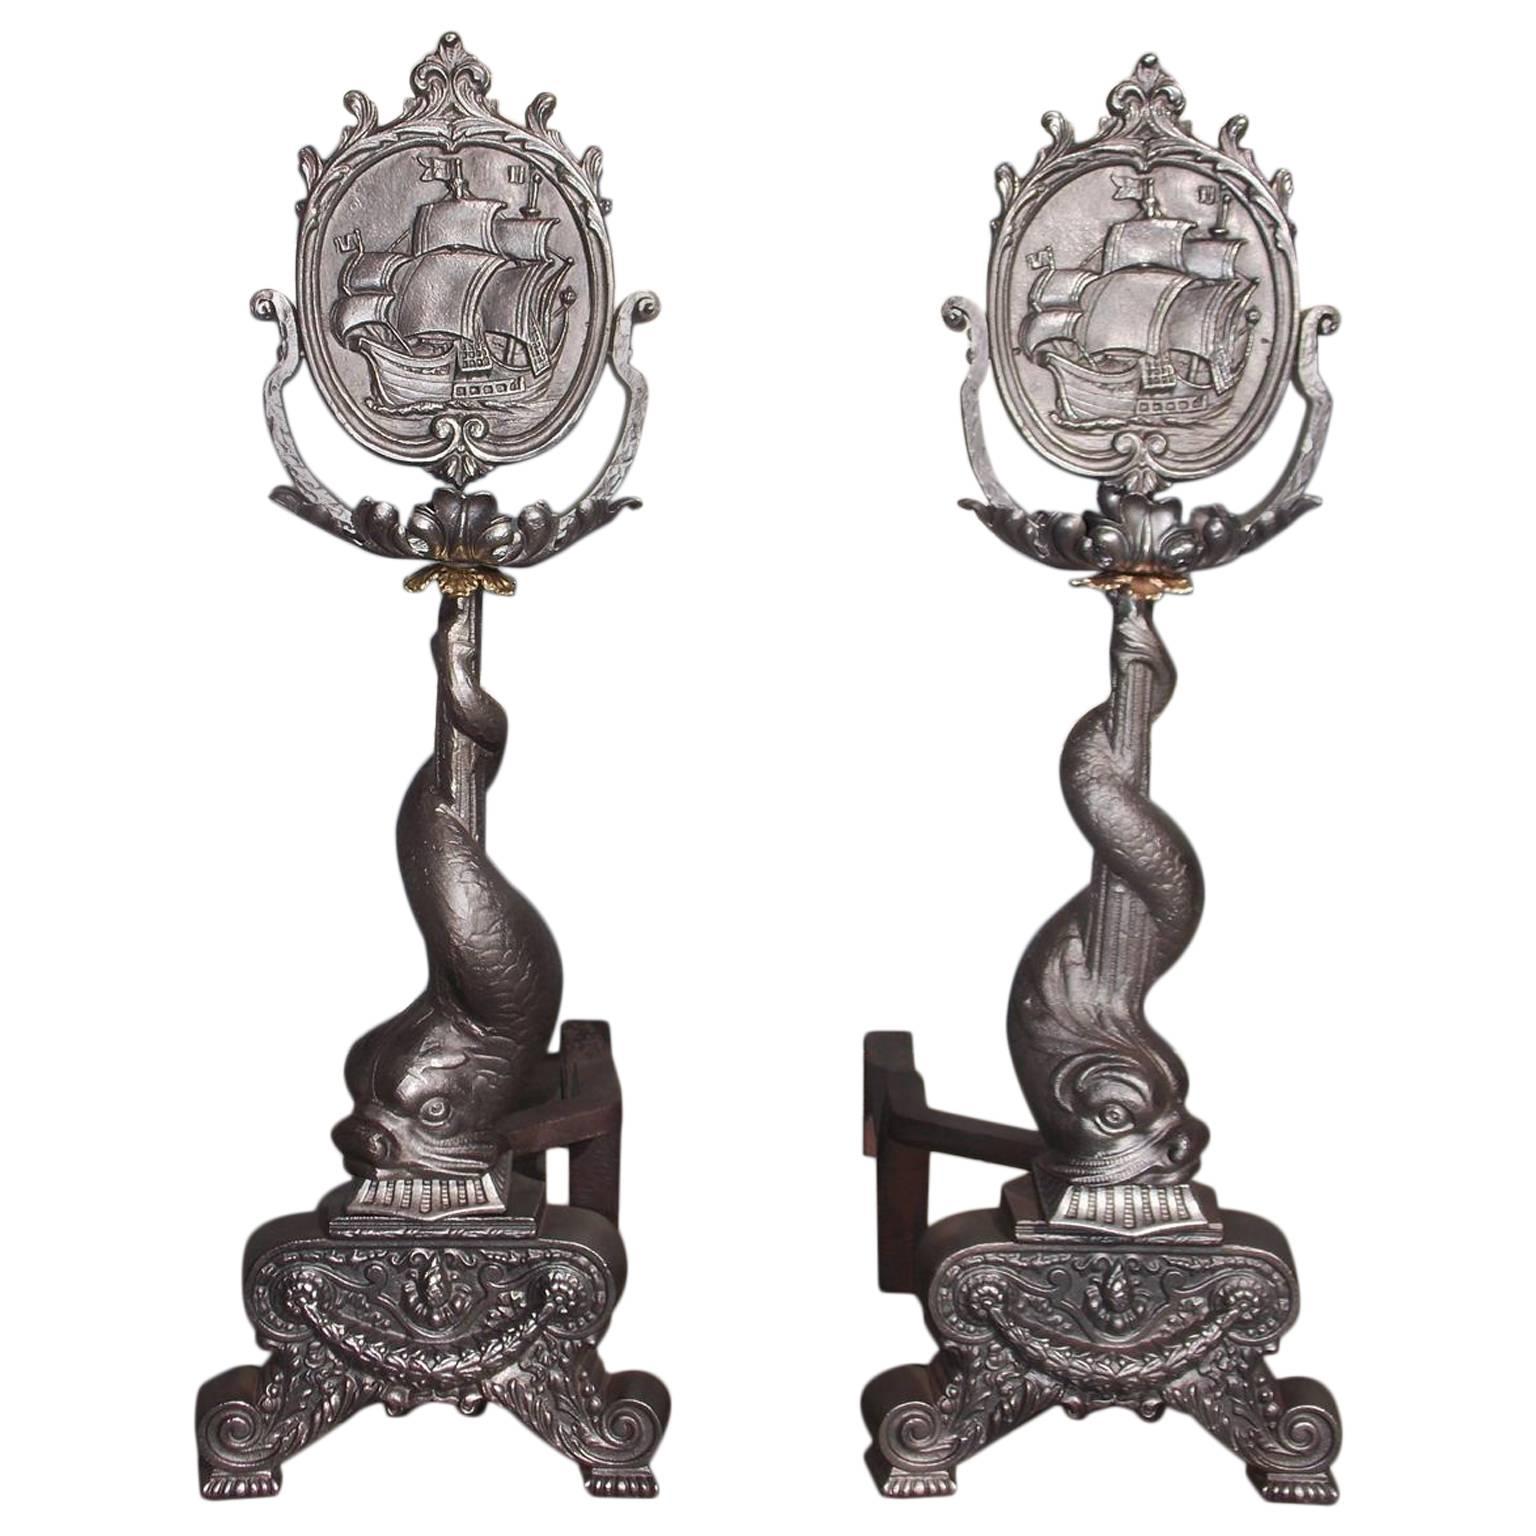 Pair of American Polished Steel & Brass Dolphin Ship Andirons, Circa 1850